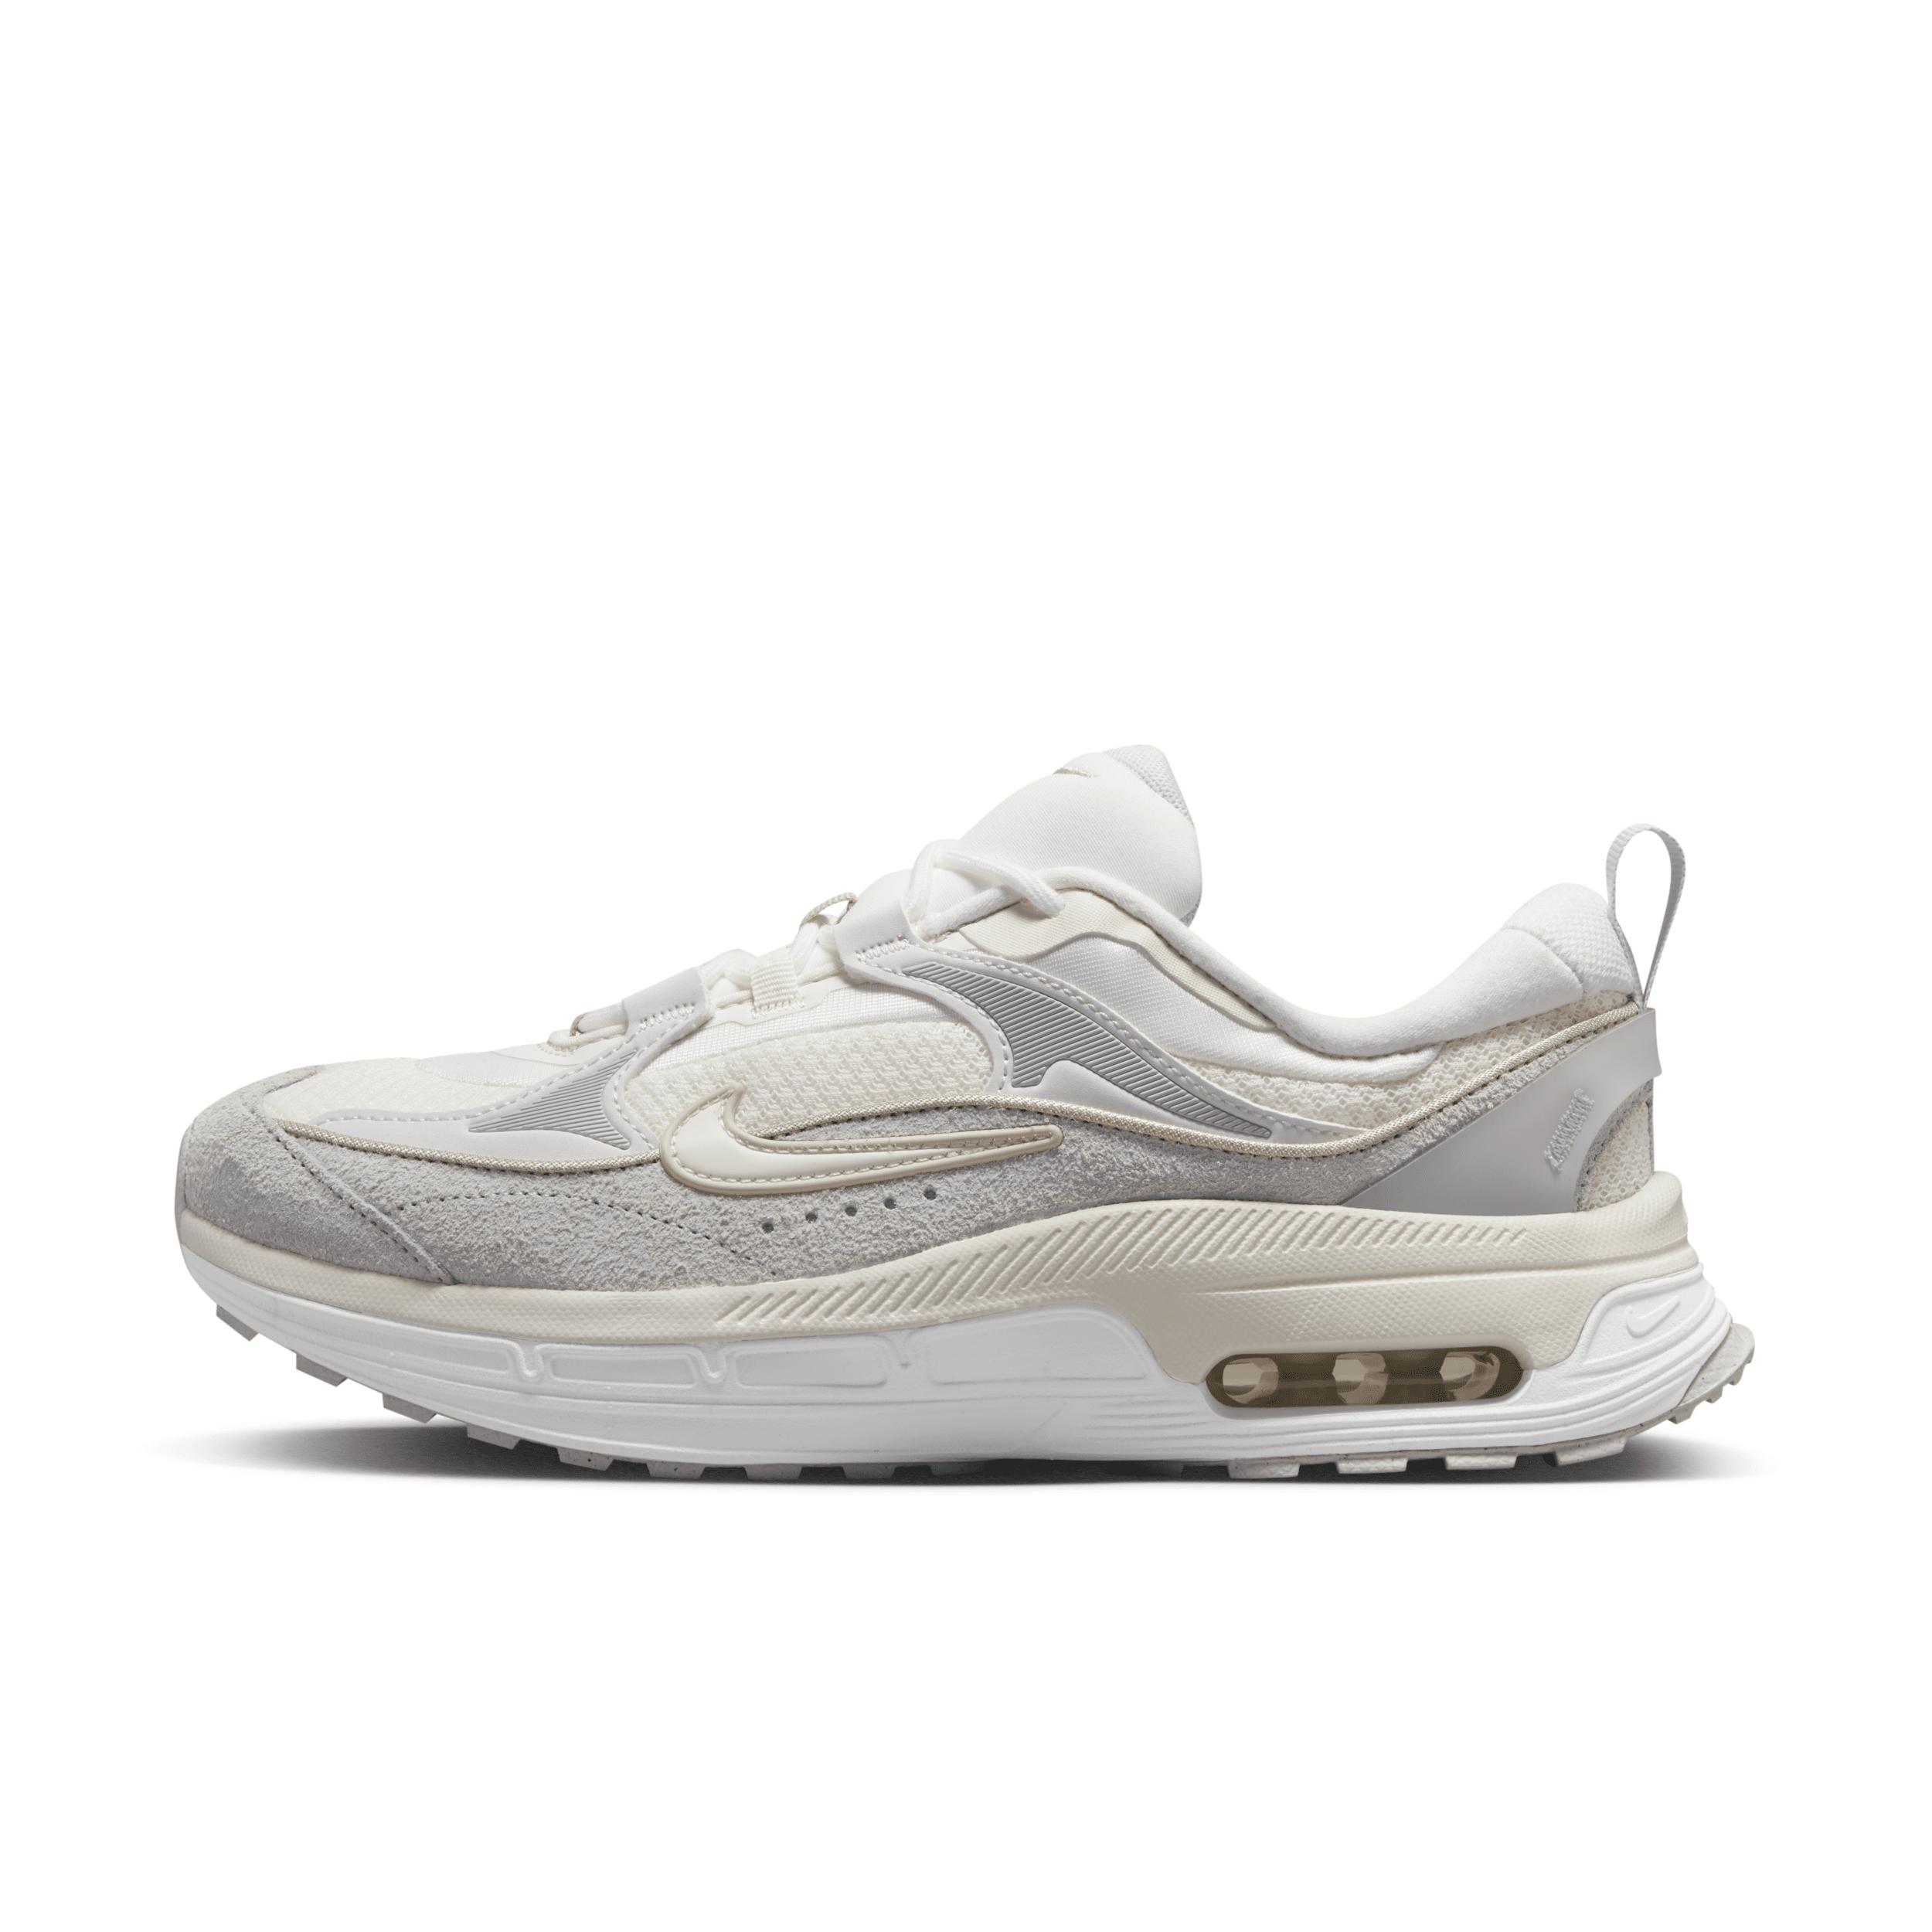 Nike Air Max Bliss Lx Shoes in White | Lyst